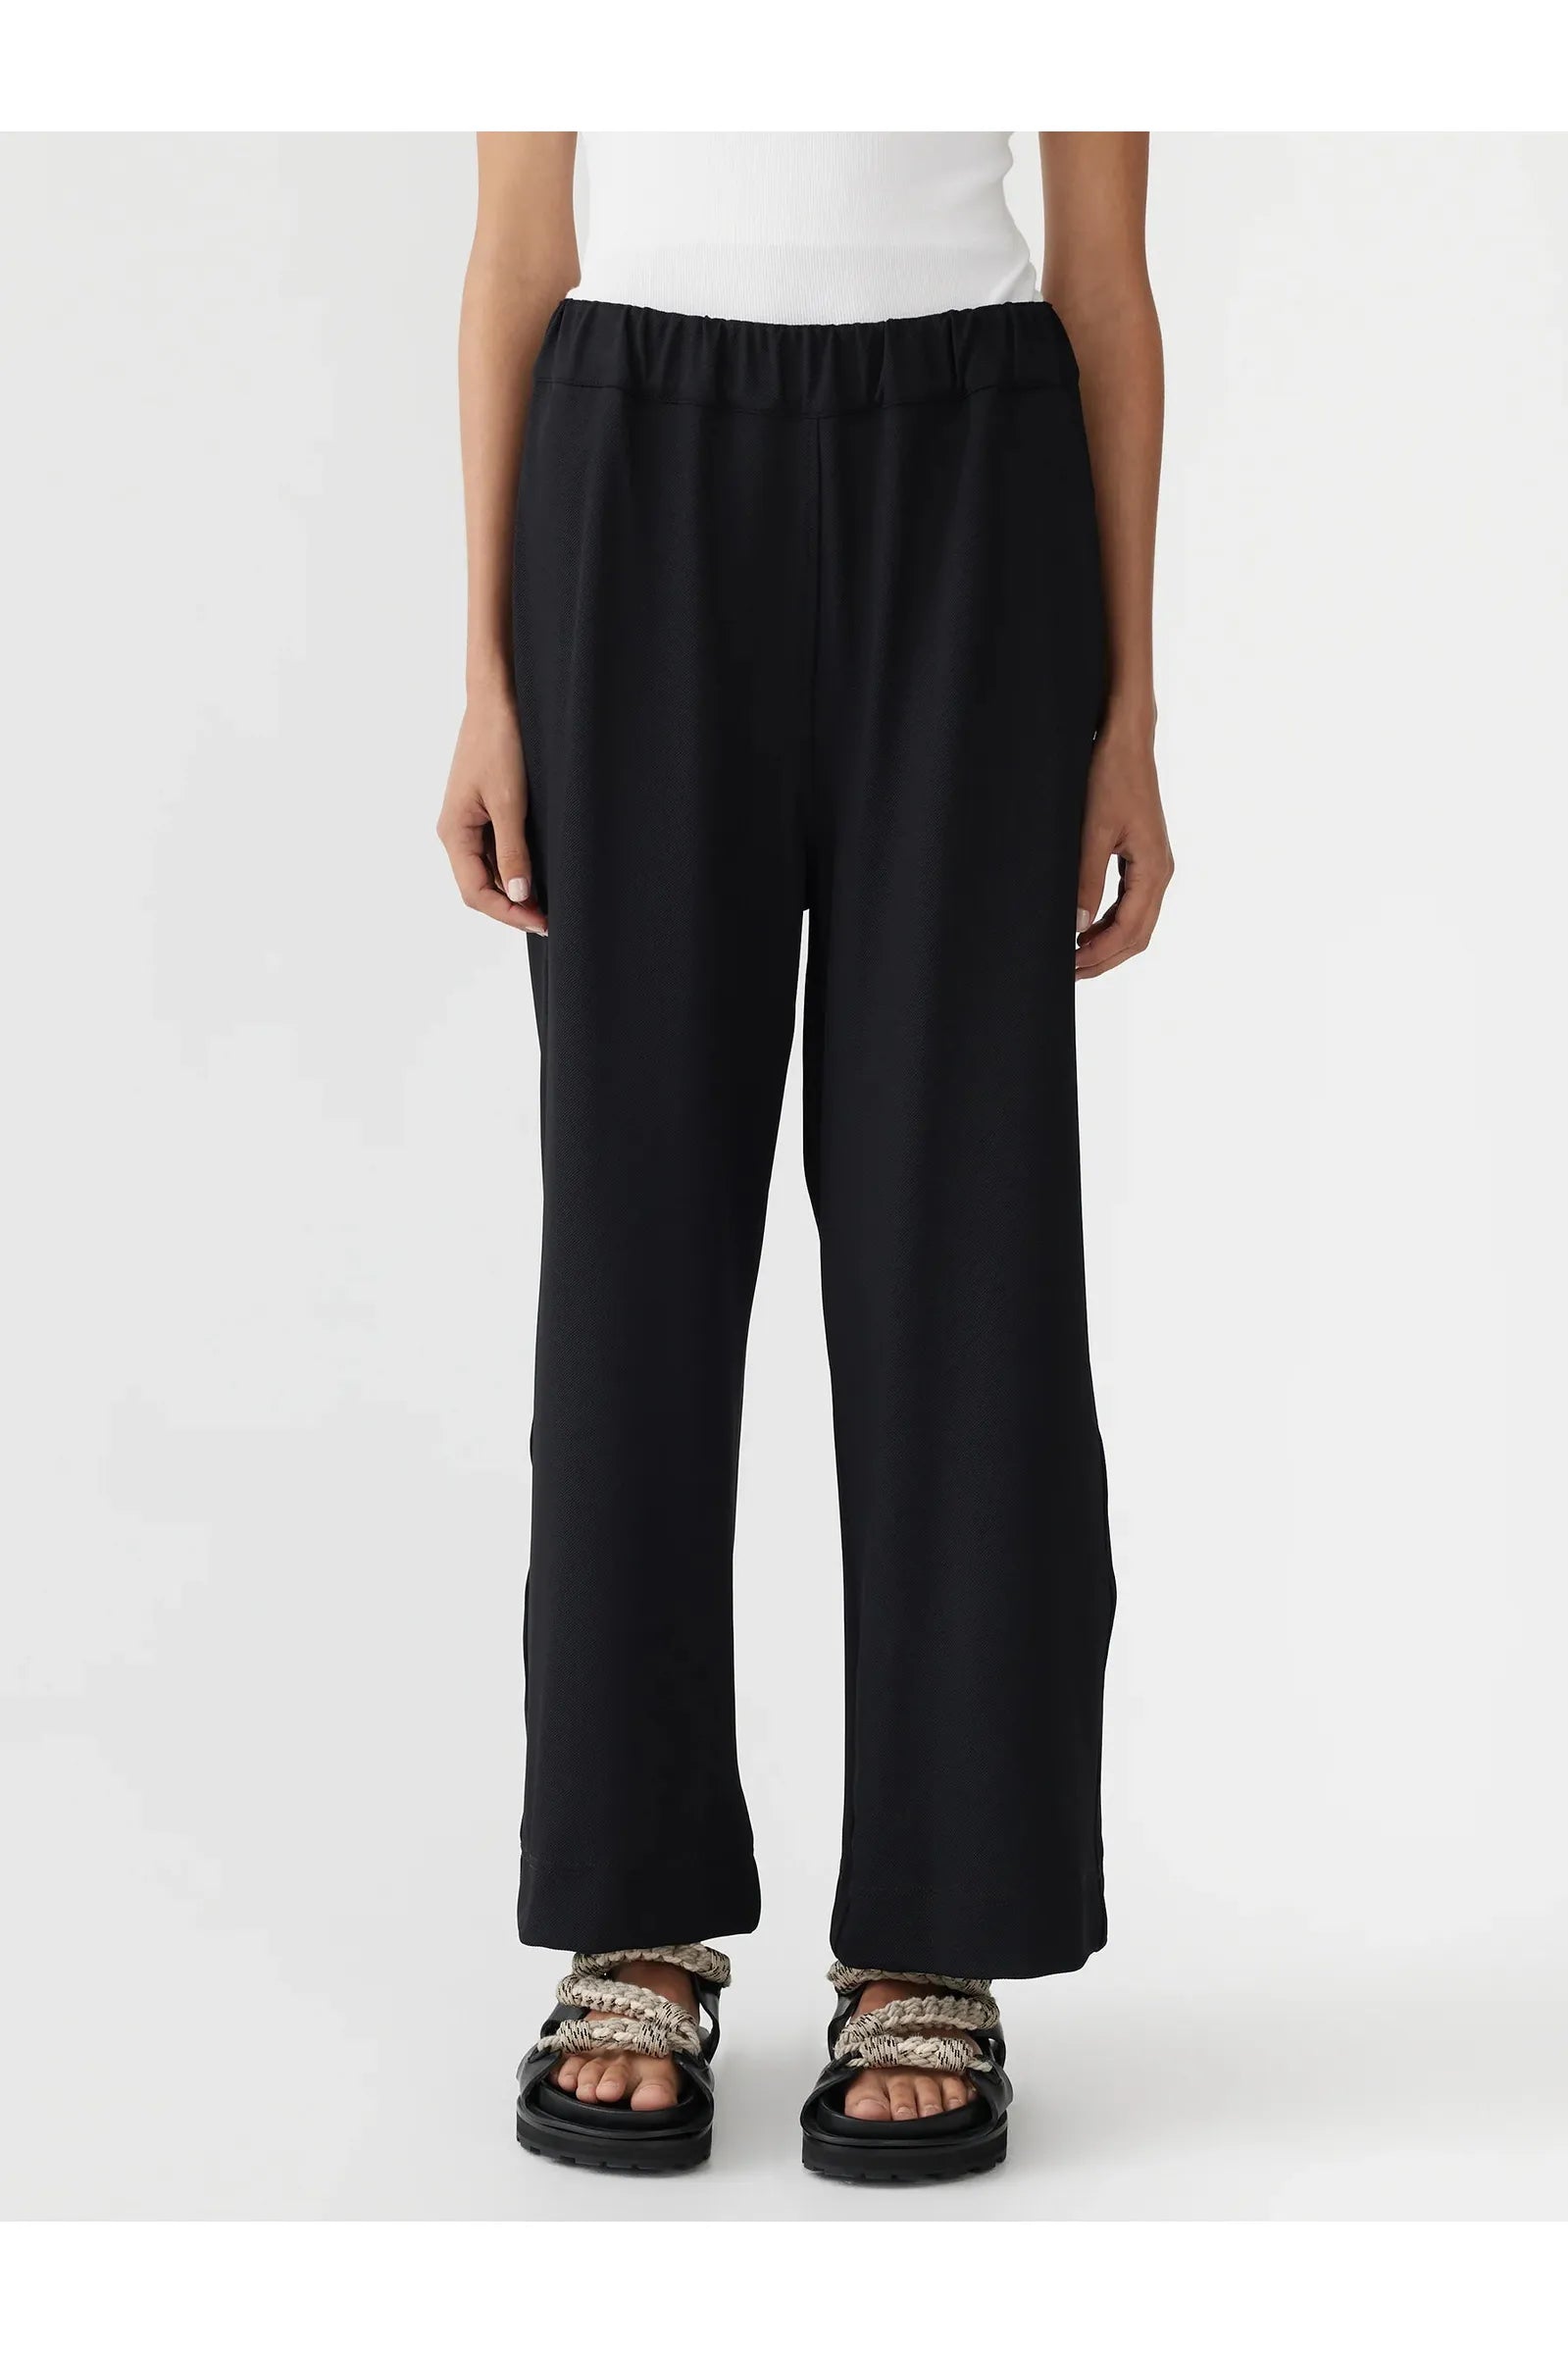 Stretch Twill Wide Leg Pant in Black by Bassike